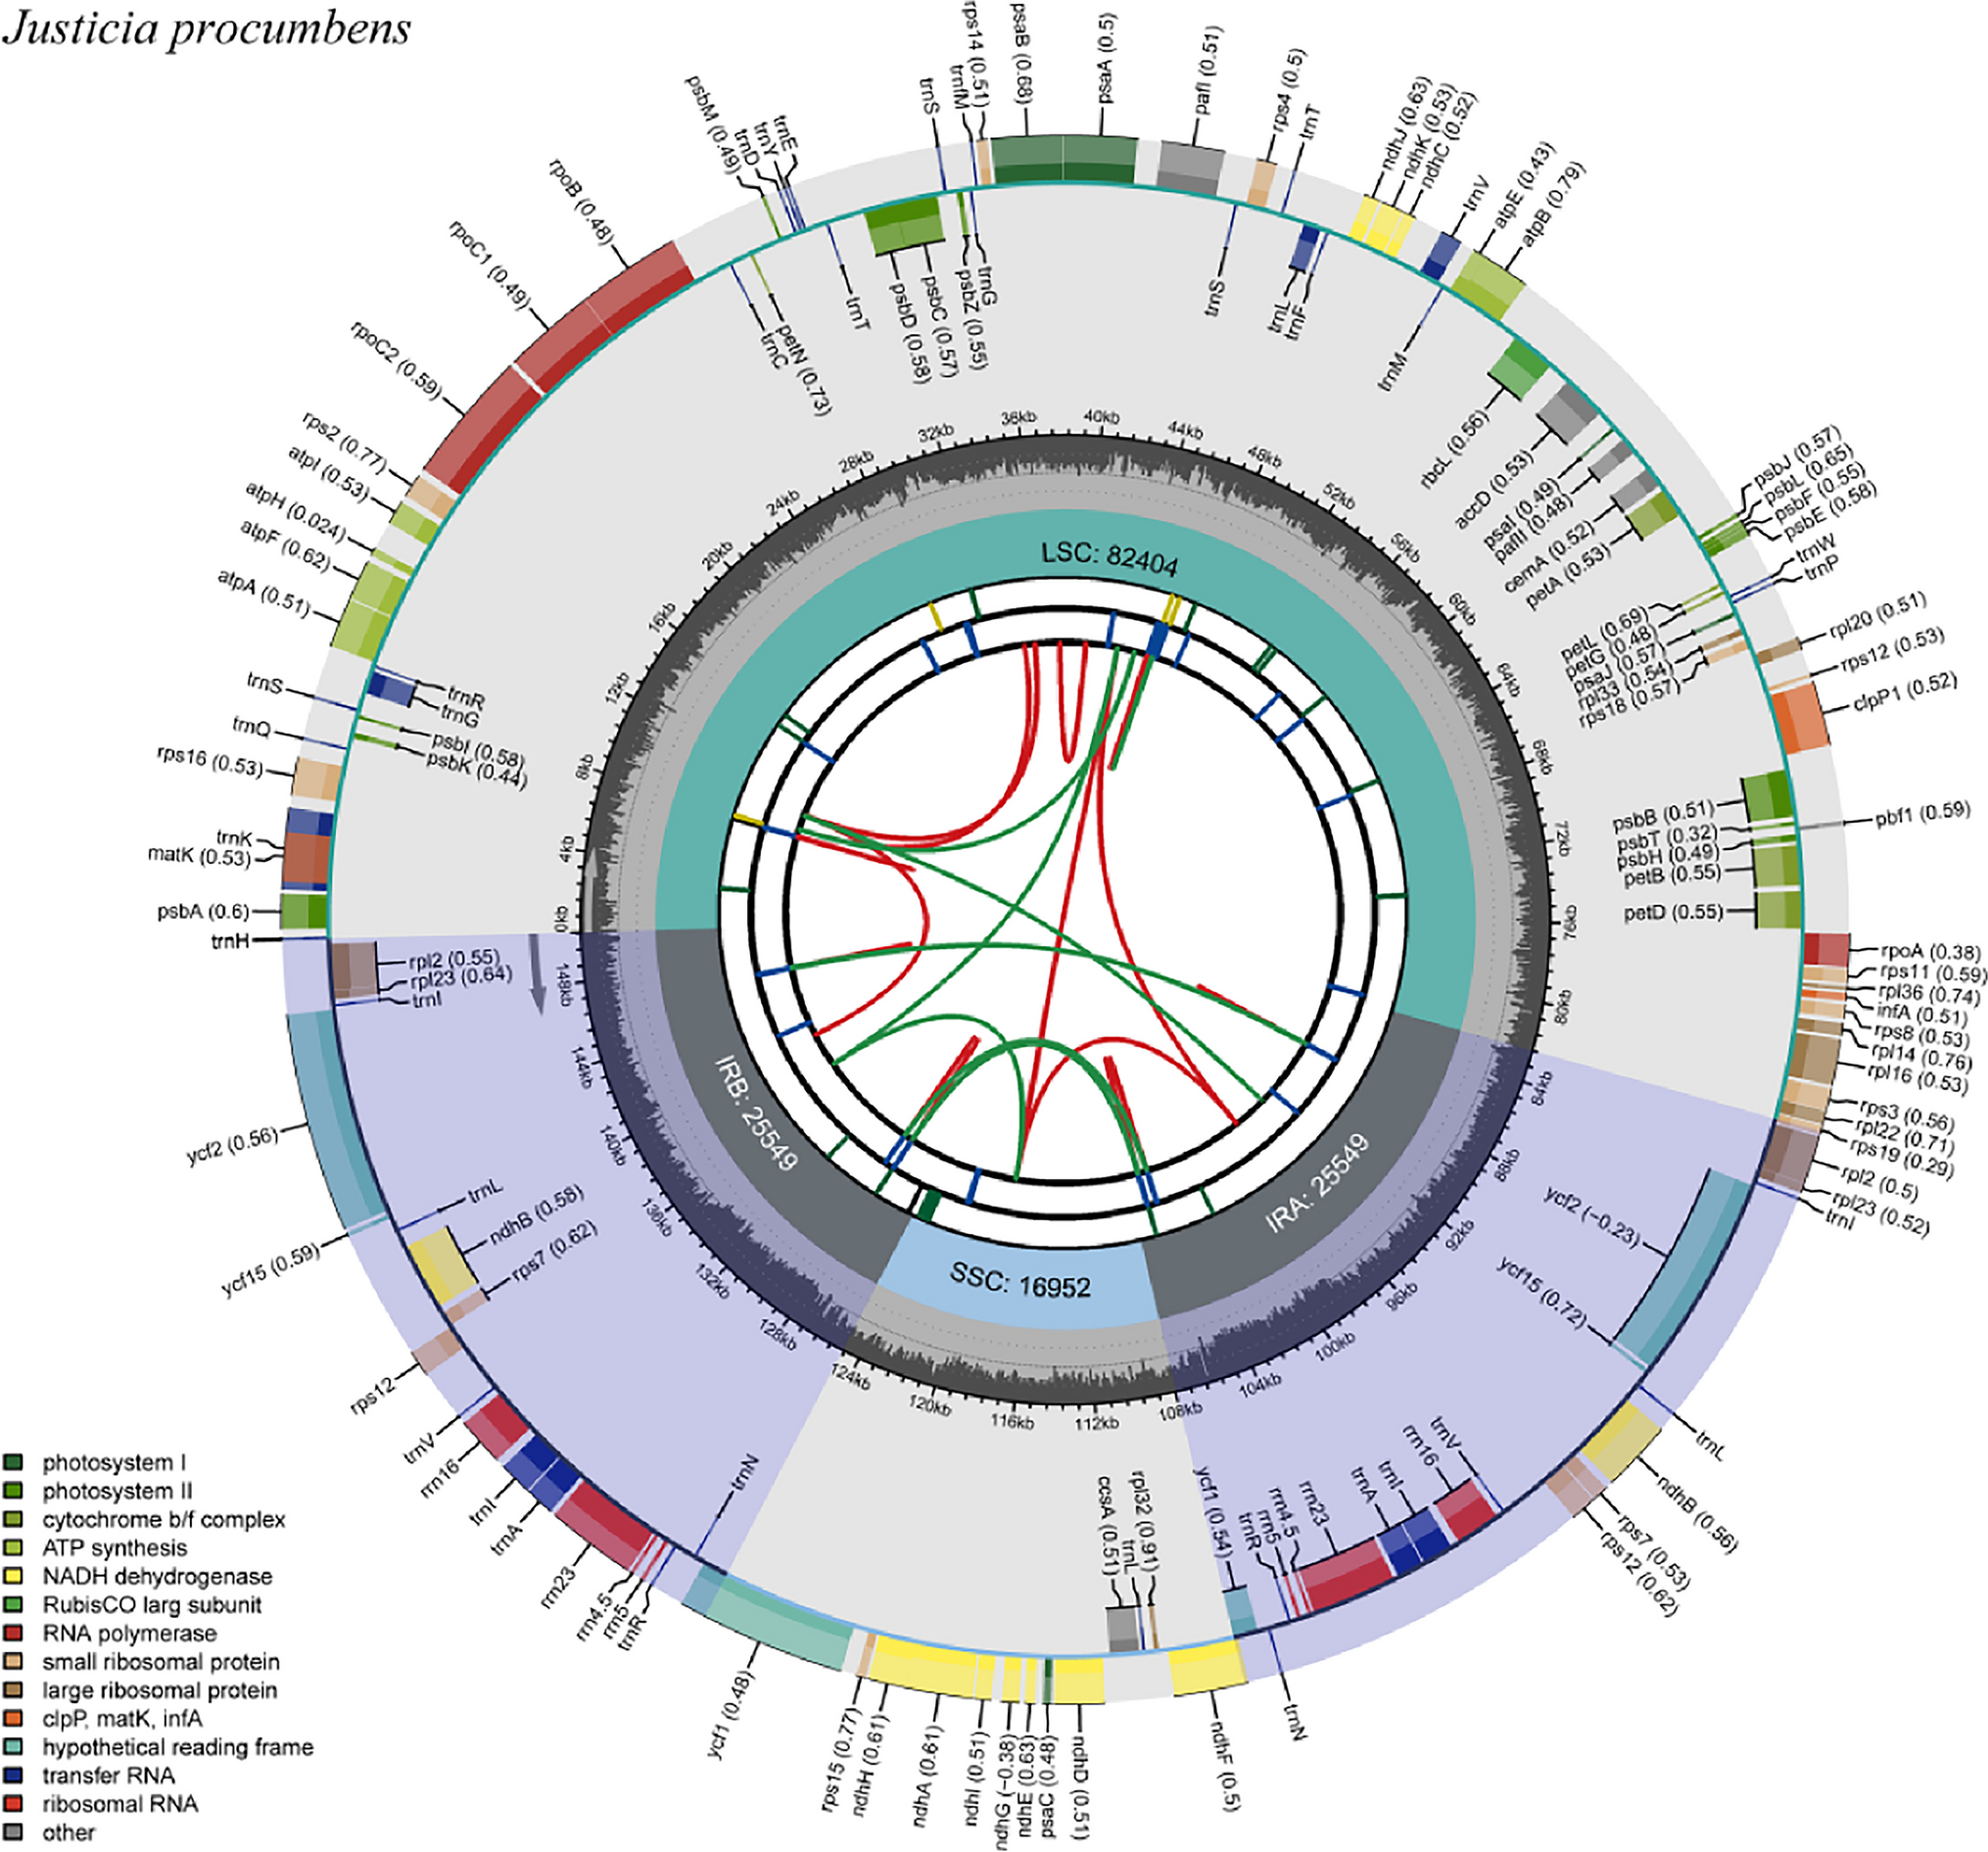 Chloroplast genome of Justicia procumbens: genomic features, comparative analysis, and phylogenetic relationships among Justicieae species